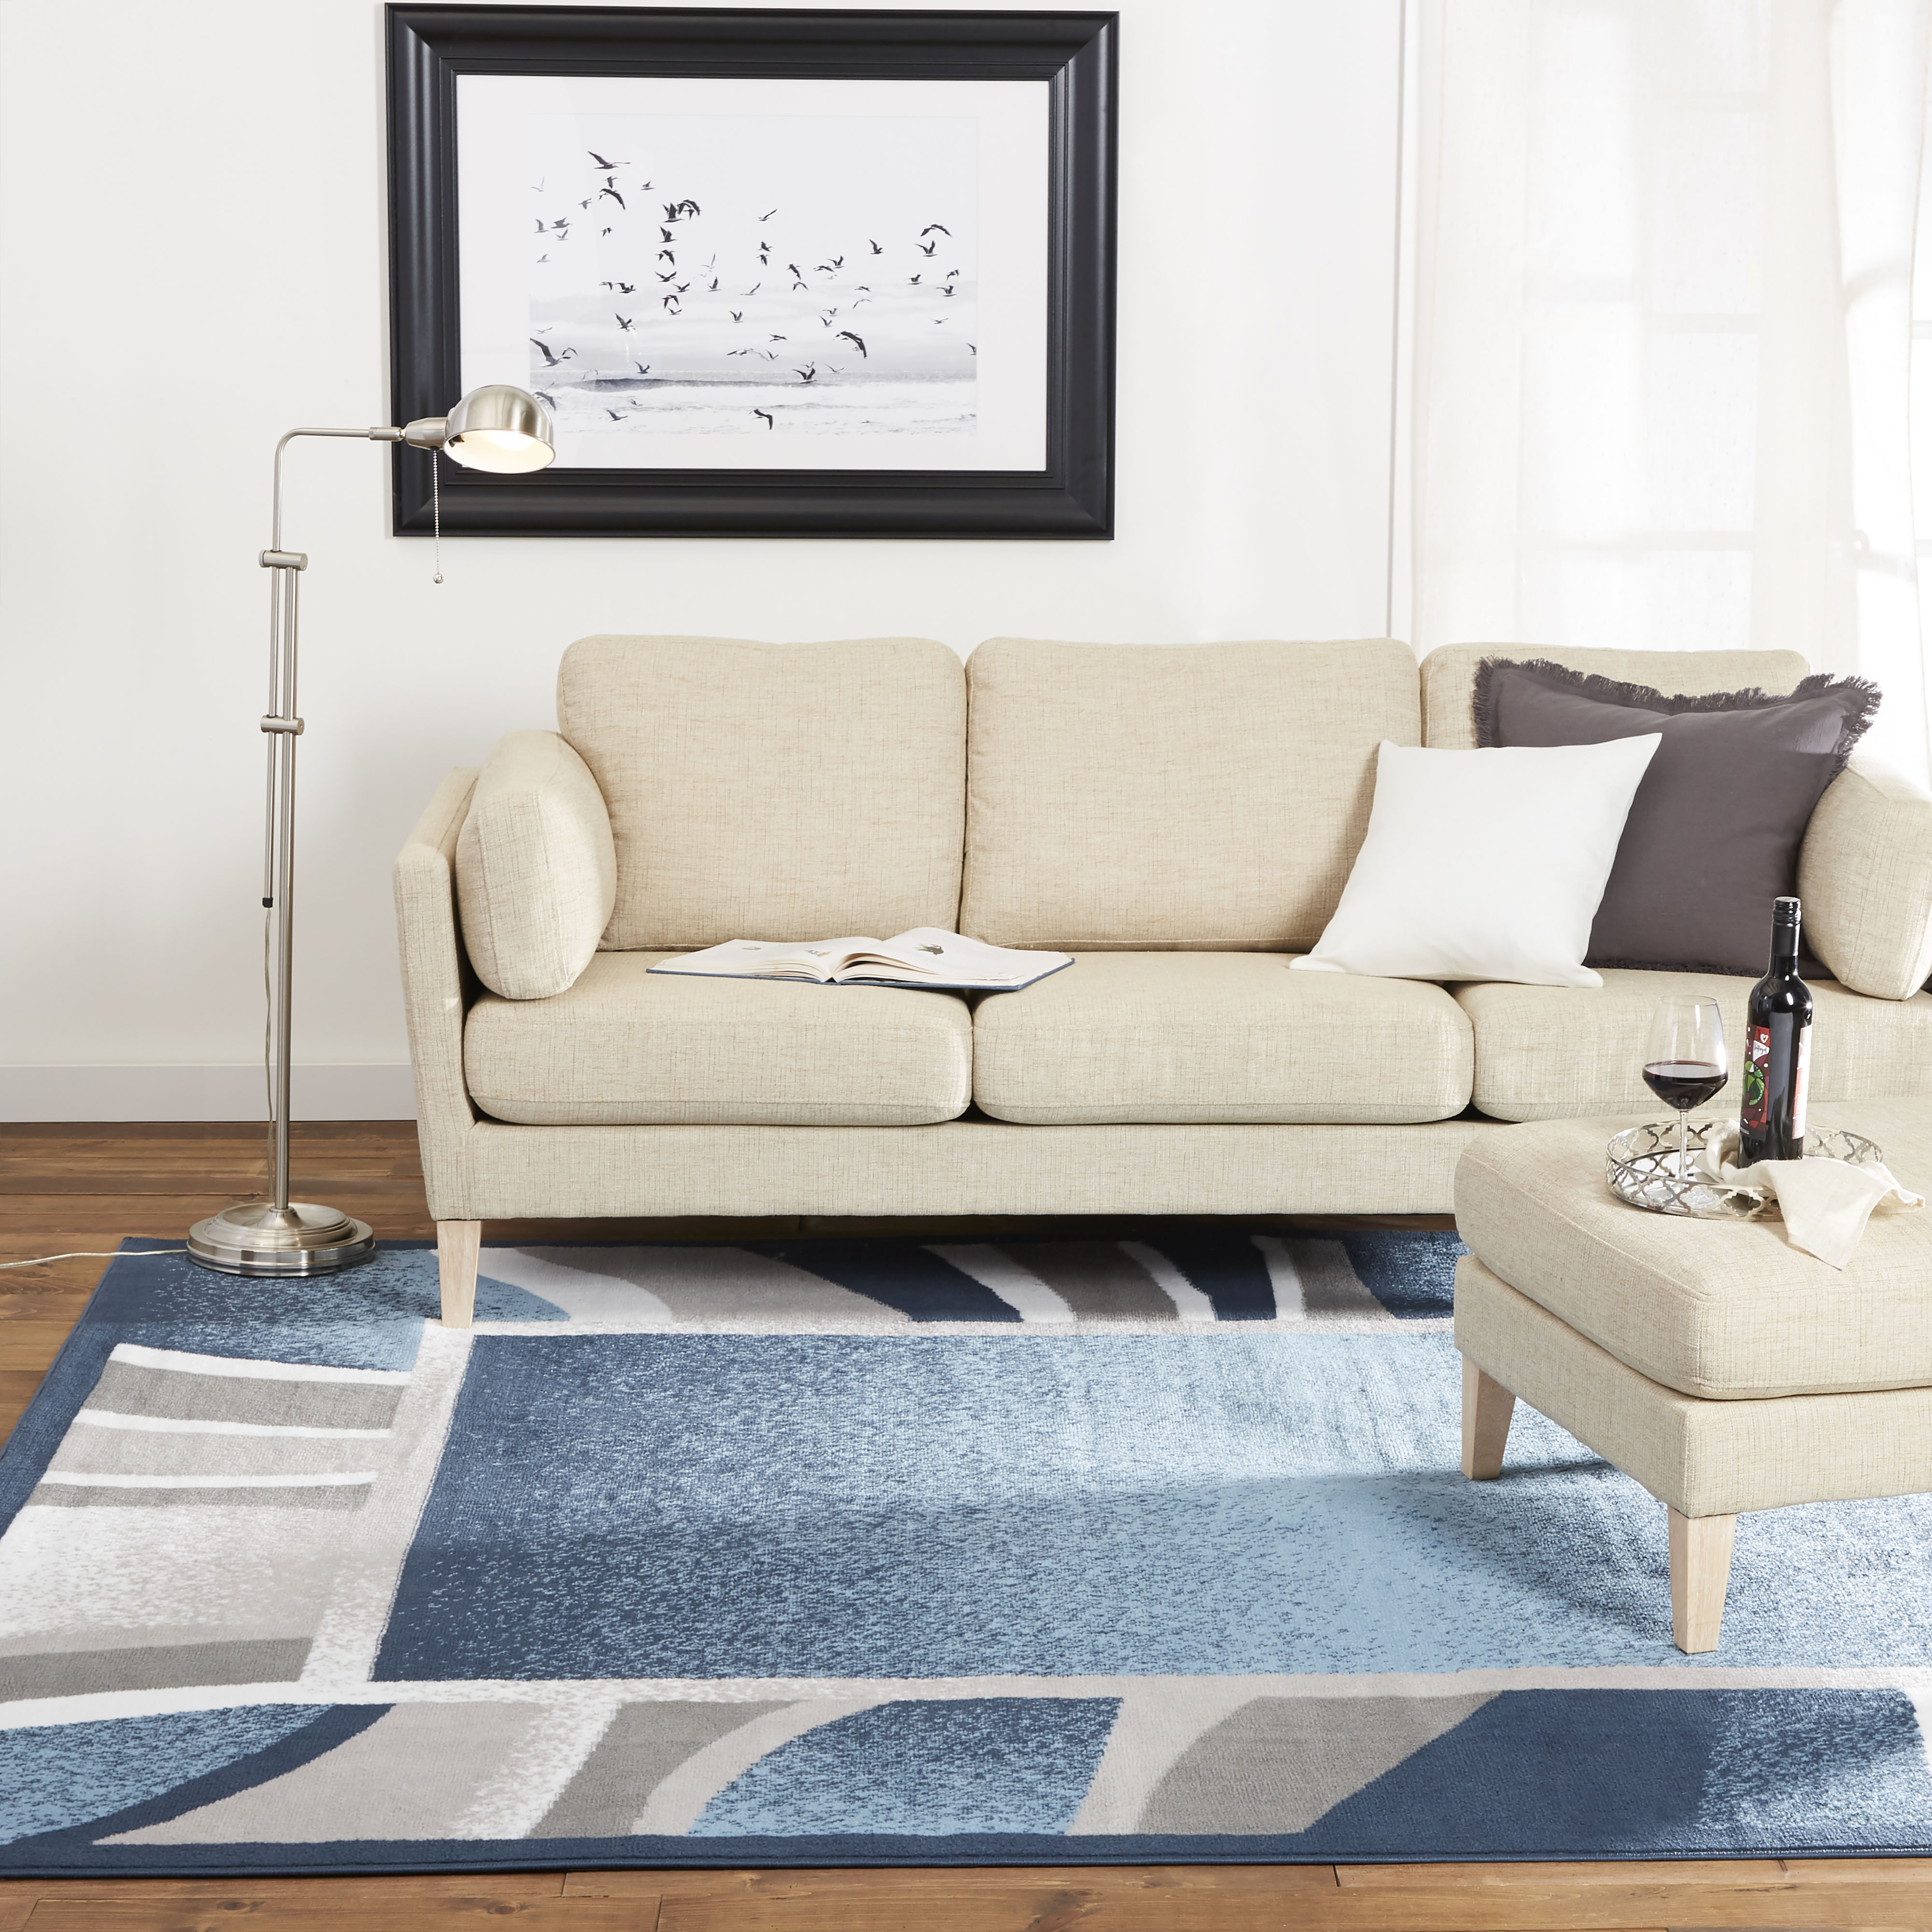 Home Dynamix Premium Rizzy Contemporary Abstract Border Area Rug, Blue/Grey, 3'7"x5'2" - image 2 of 6